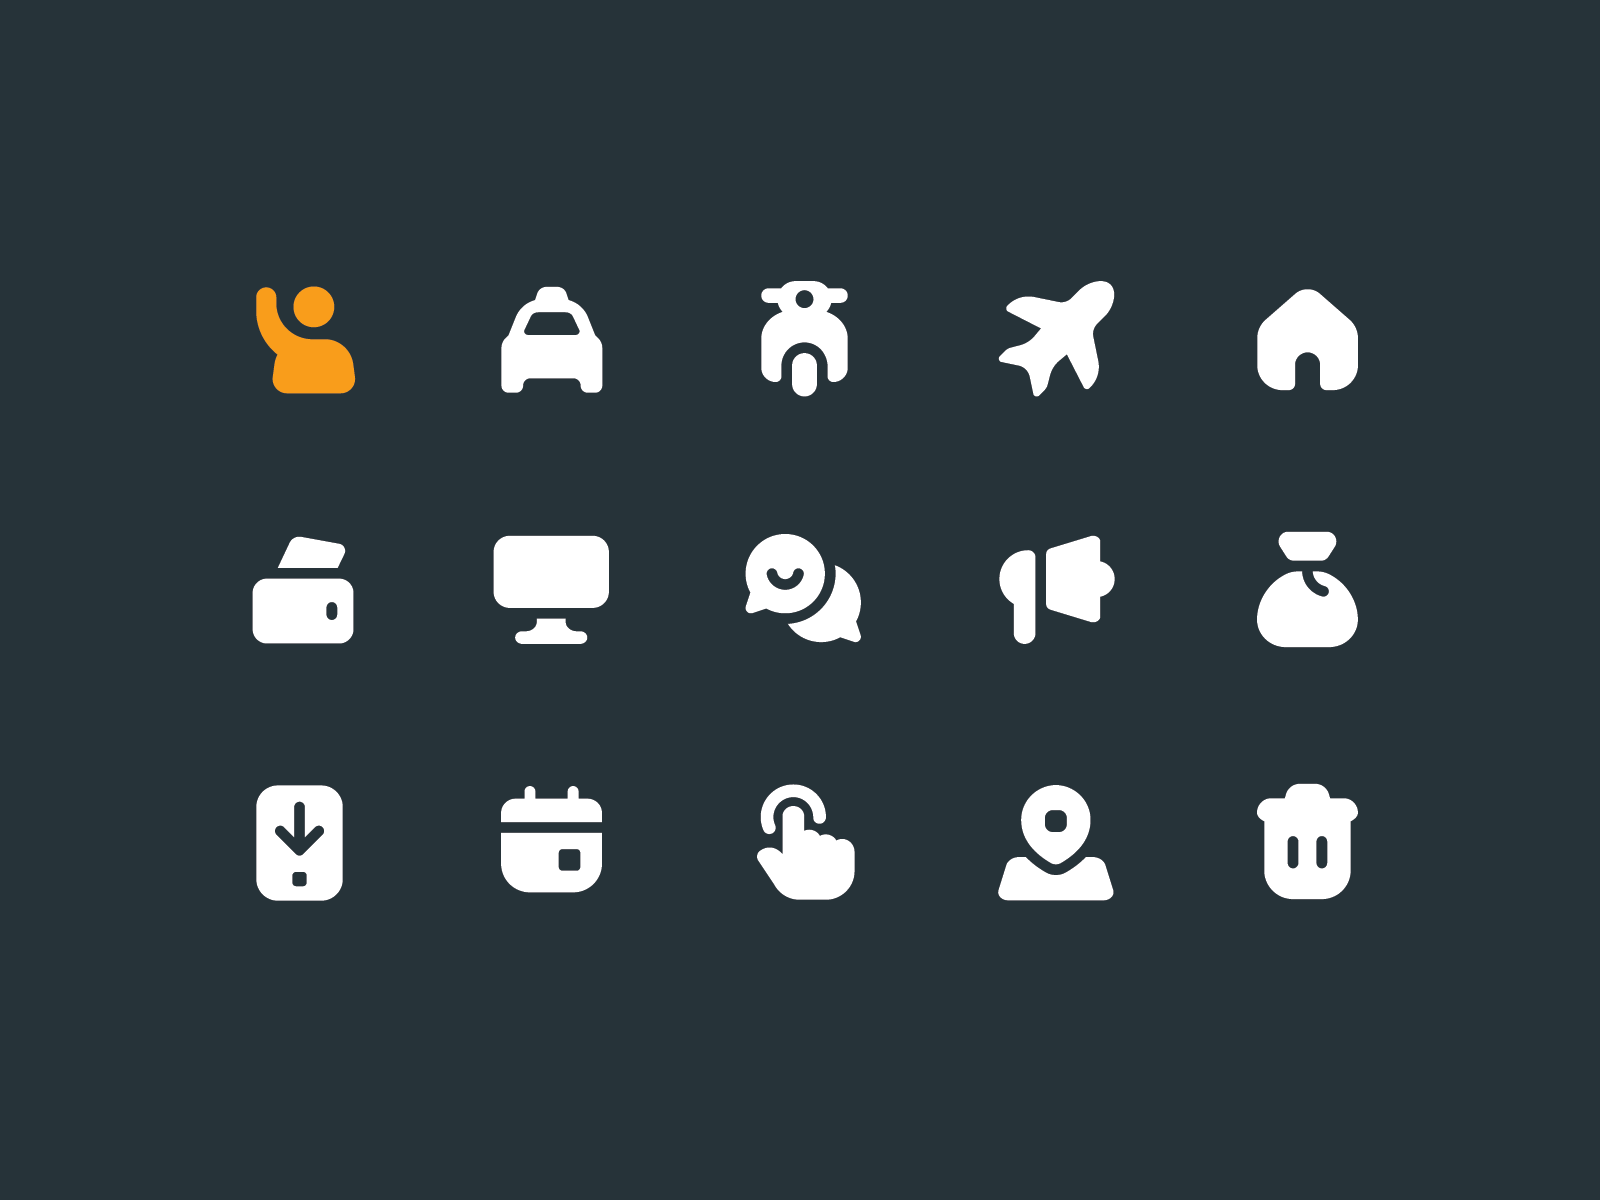 Gett Iconography System + Style Guide